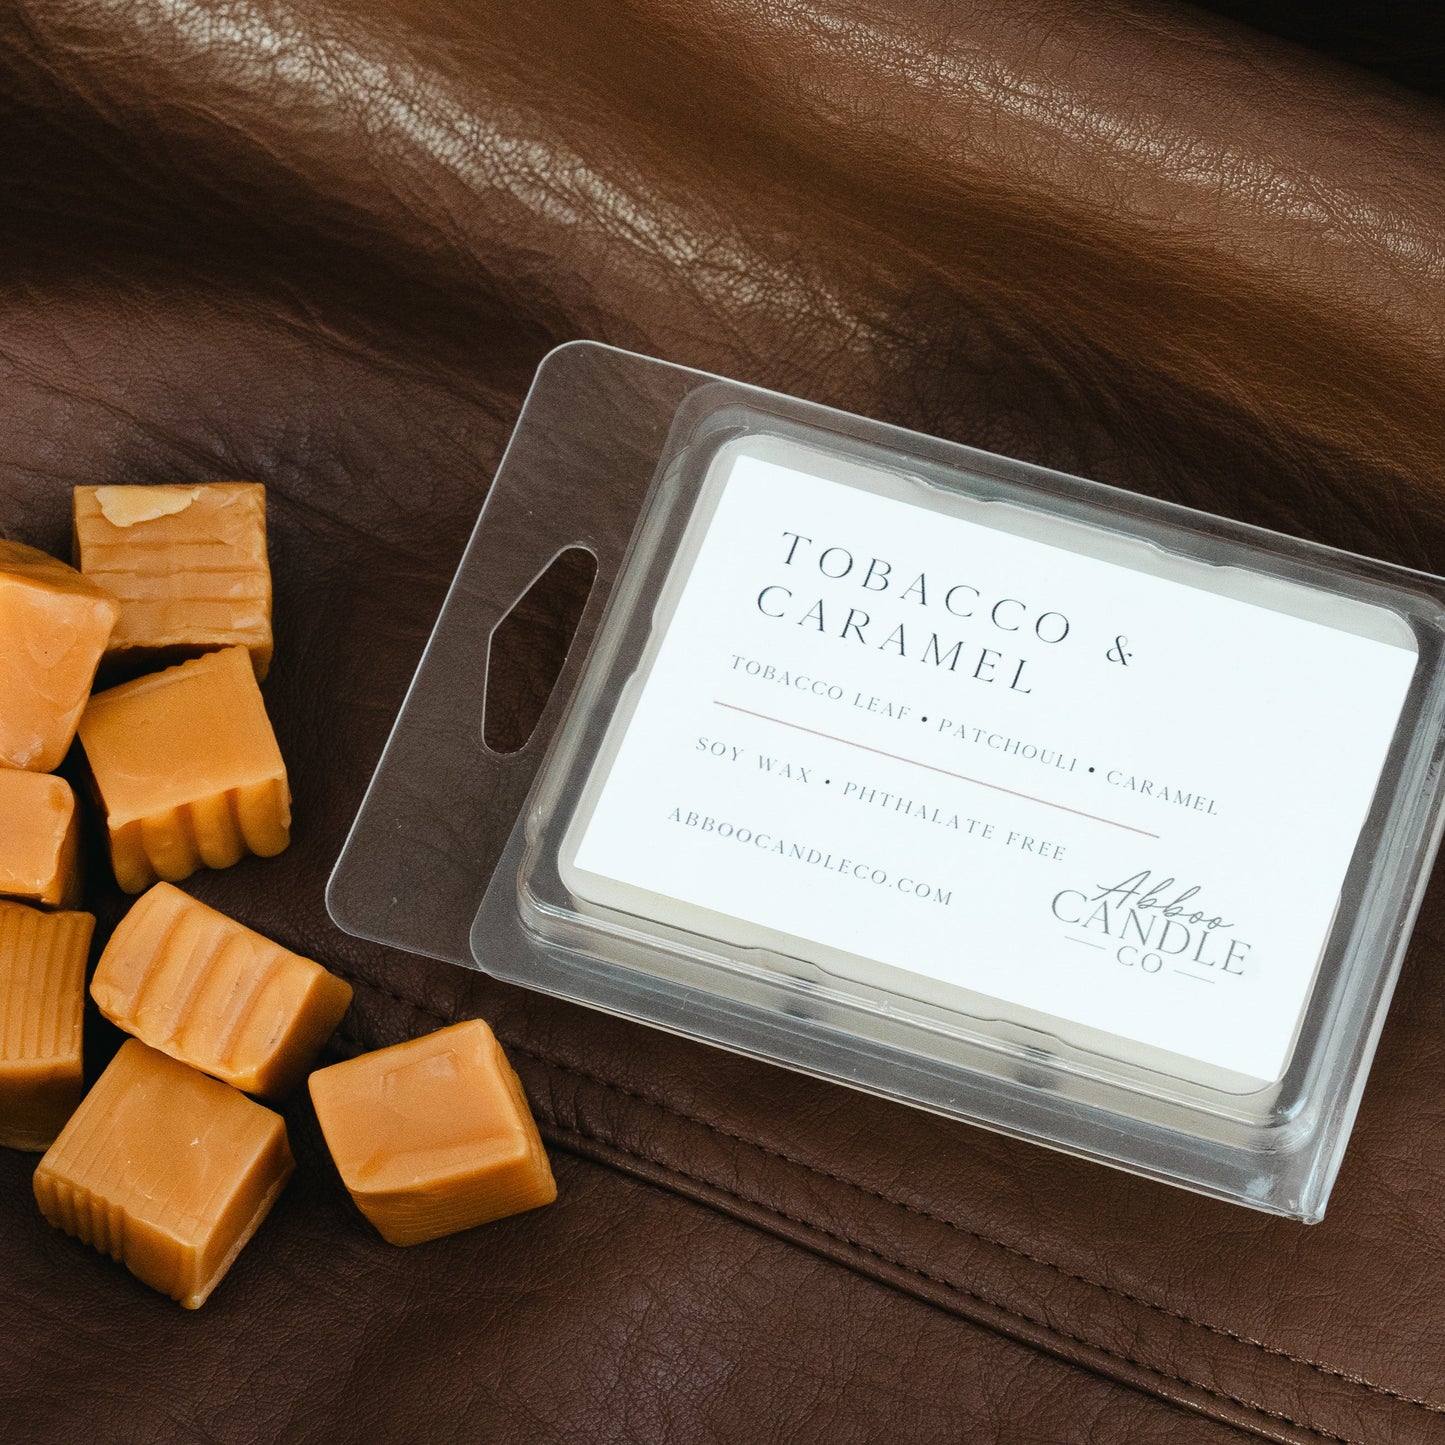 Tobacco and Caramel Soy Wax Melts - Abboo Candle Co® Wholesale